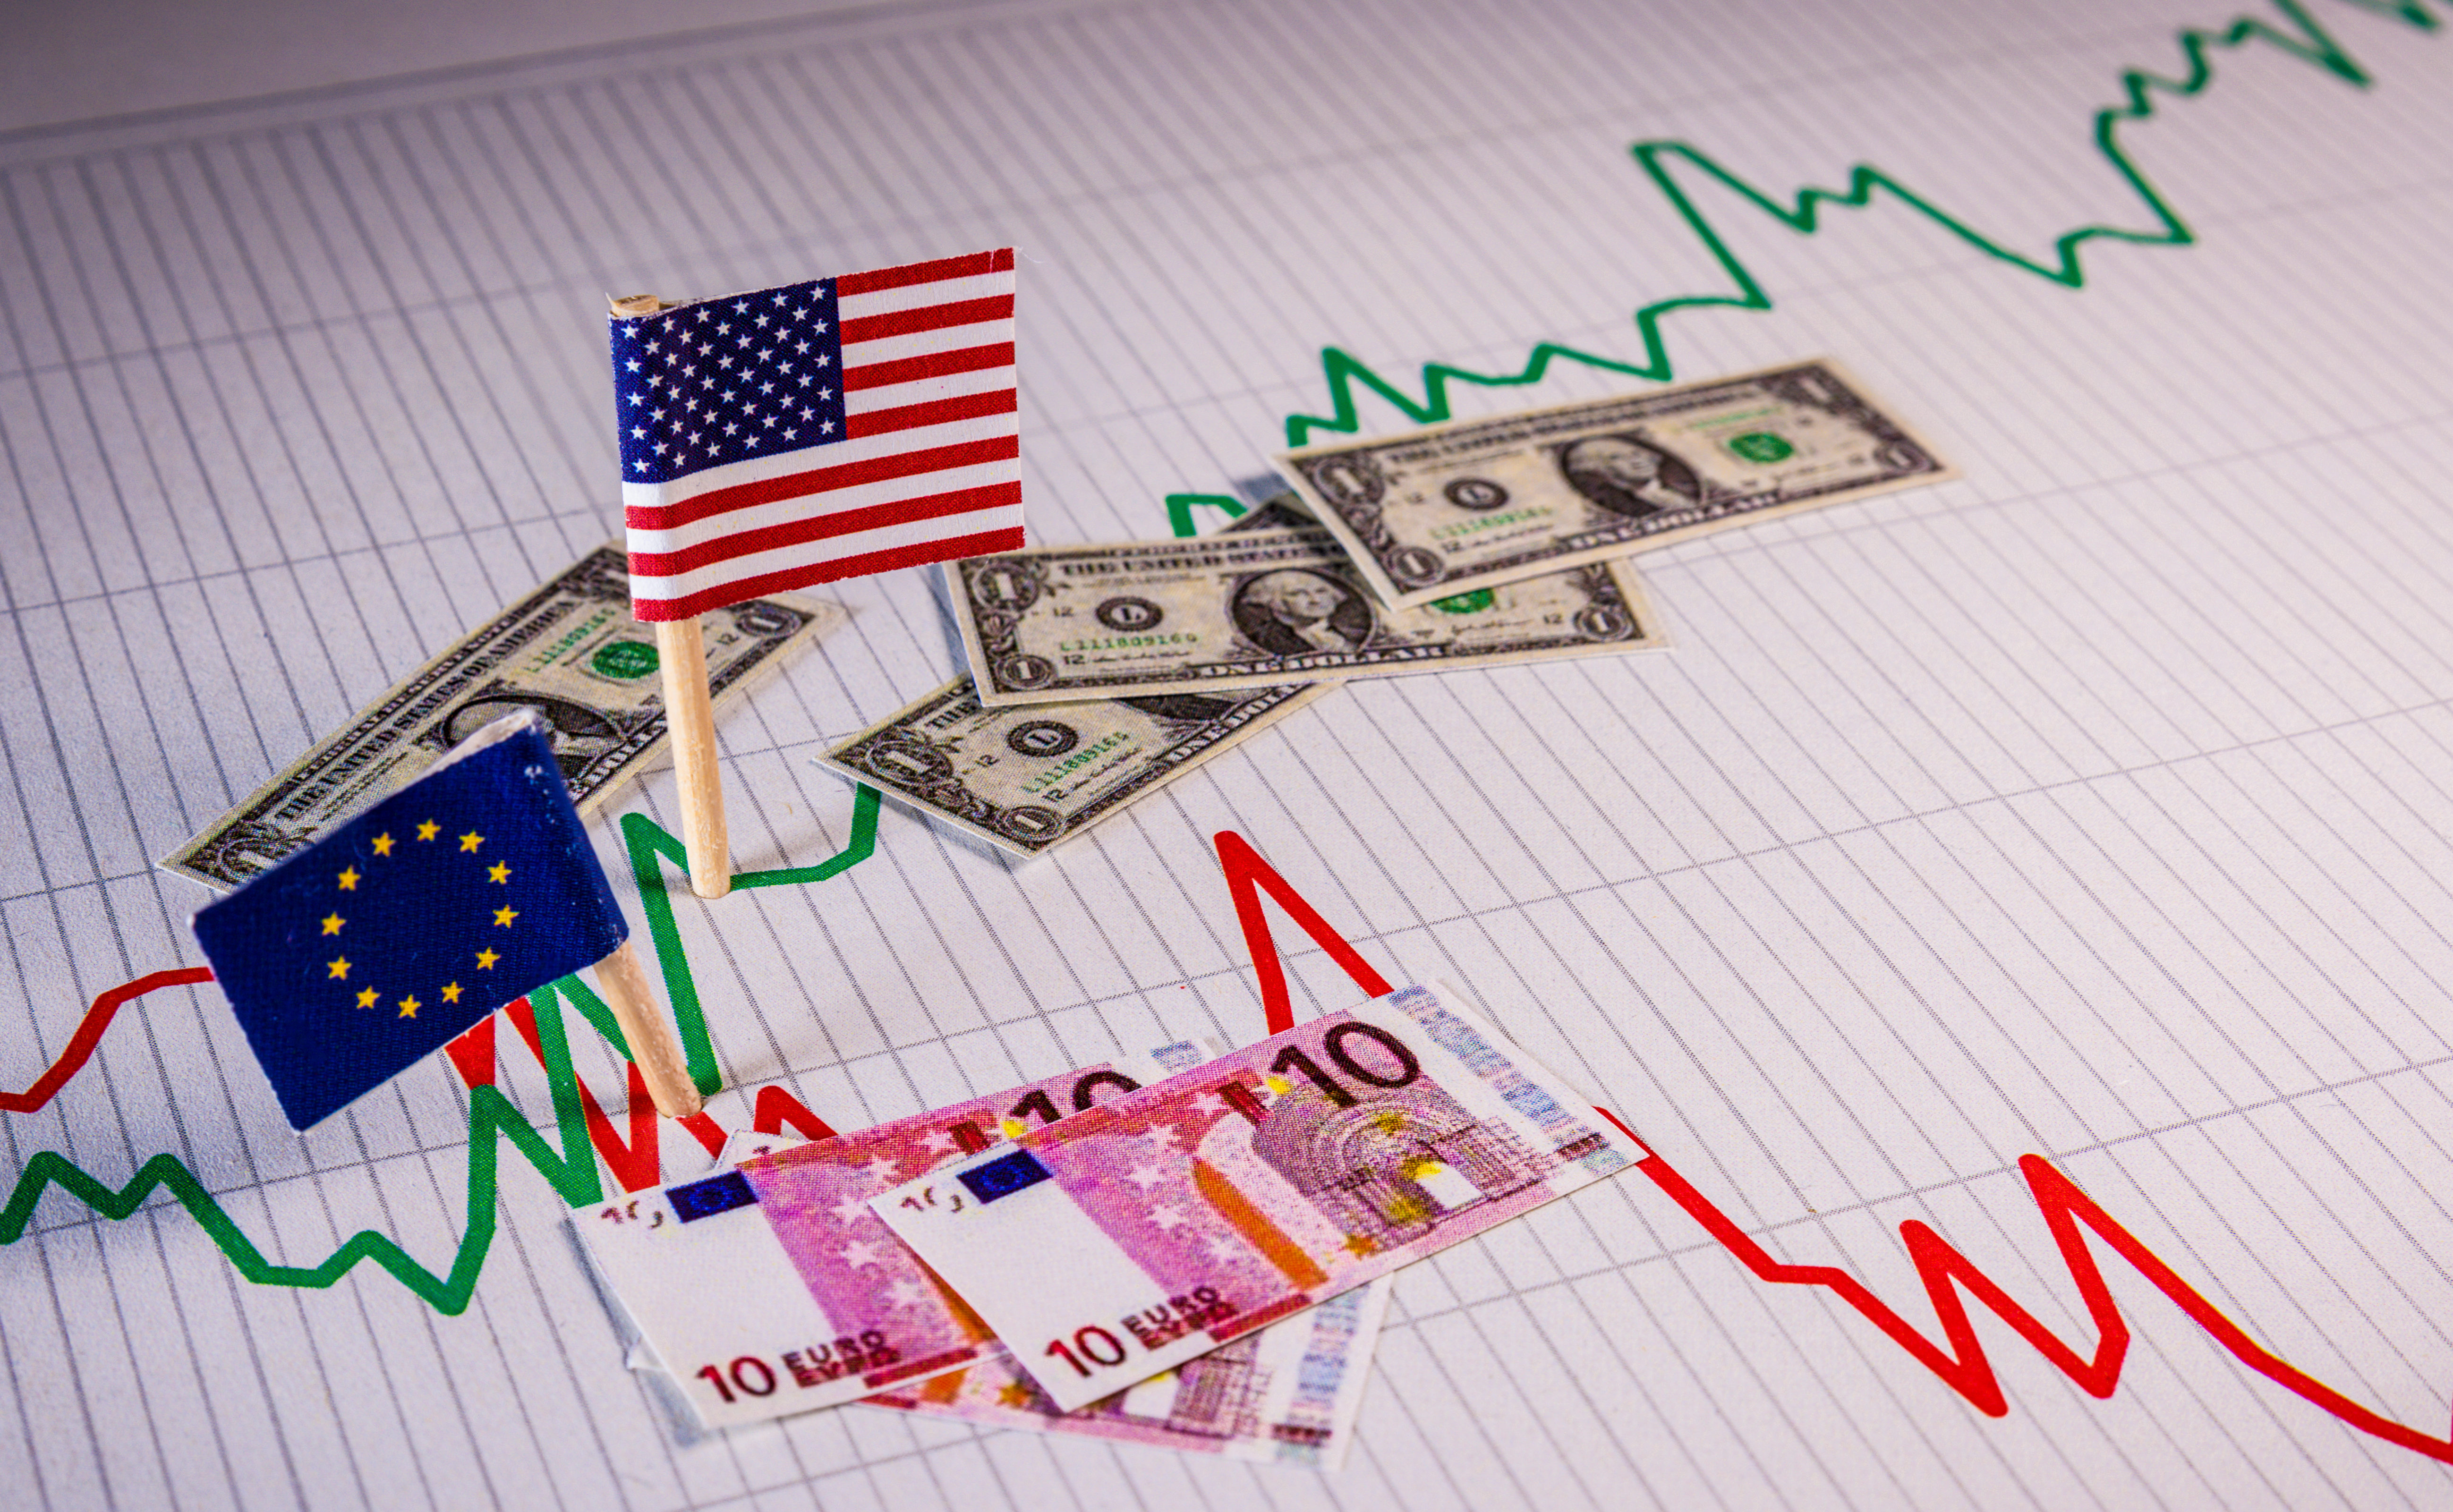 EU euro compared to American dollar. Currency exchange rate fluctuations